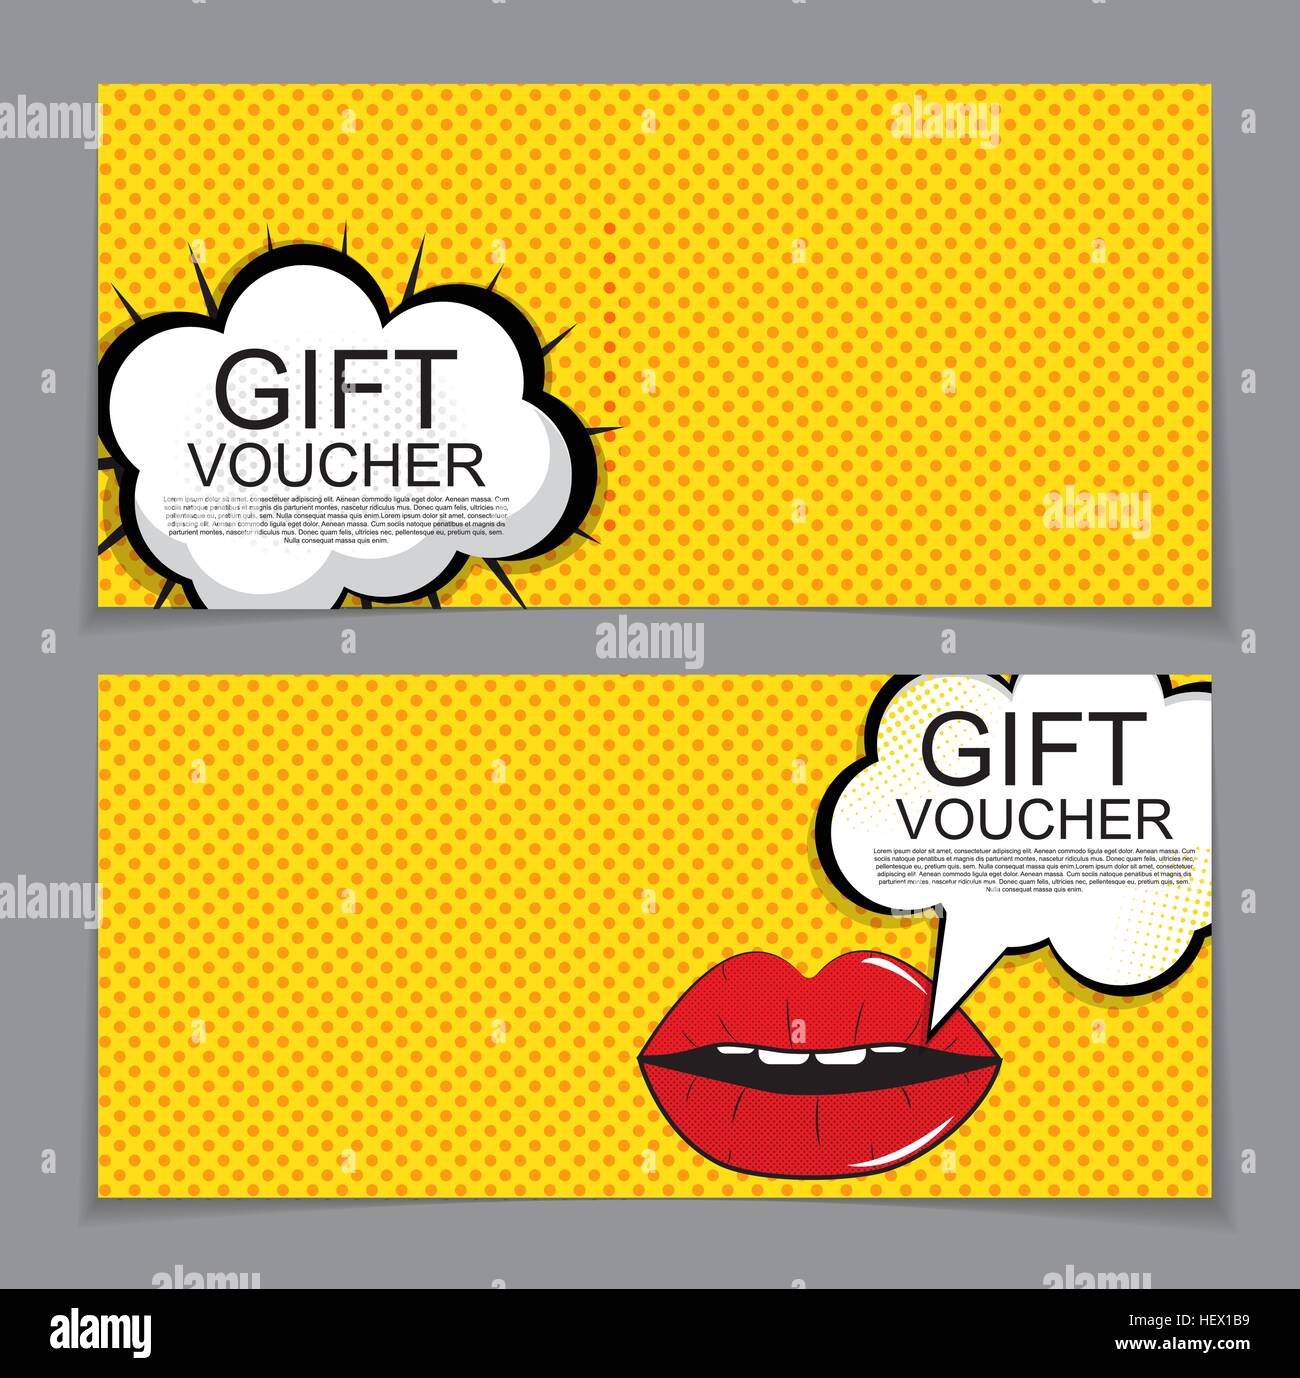 Premium Vector  Gift voucher template isolated on gray background